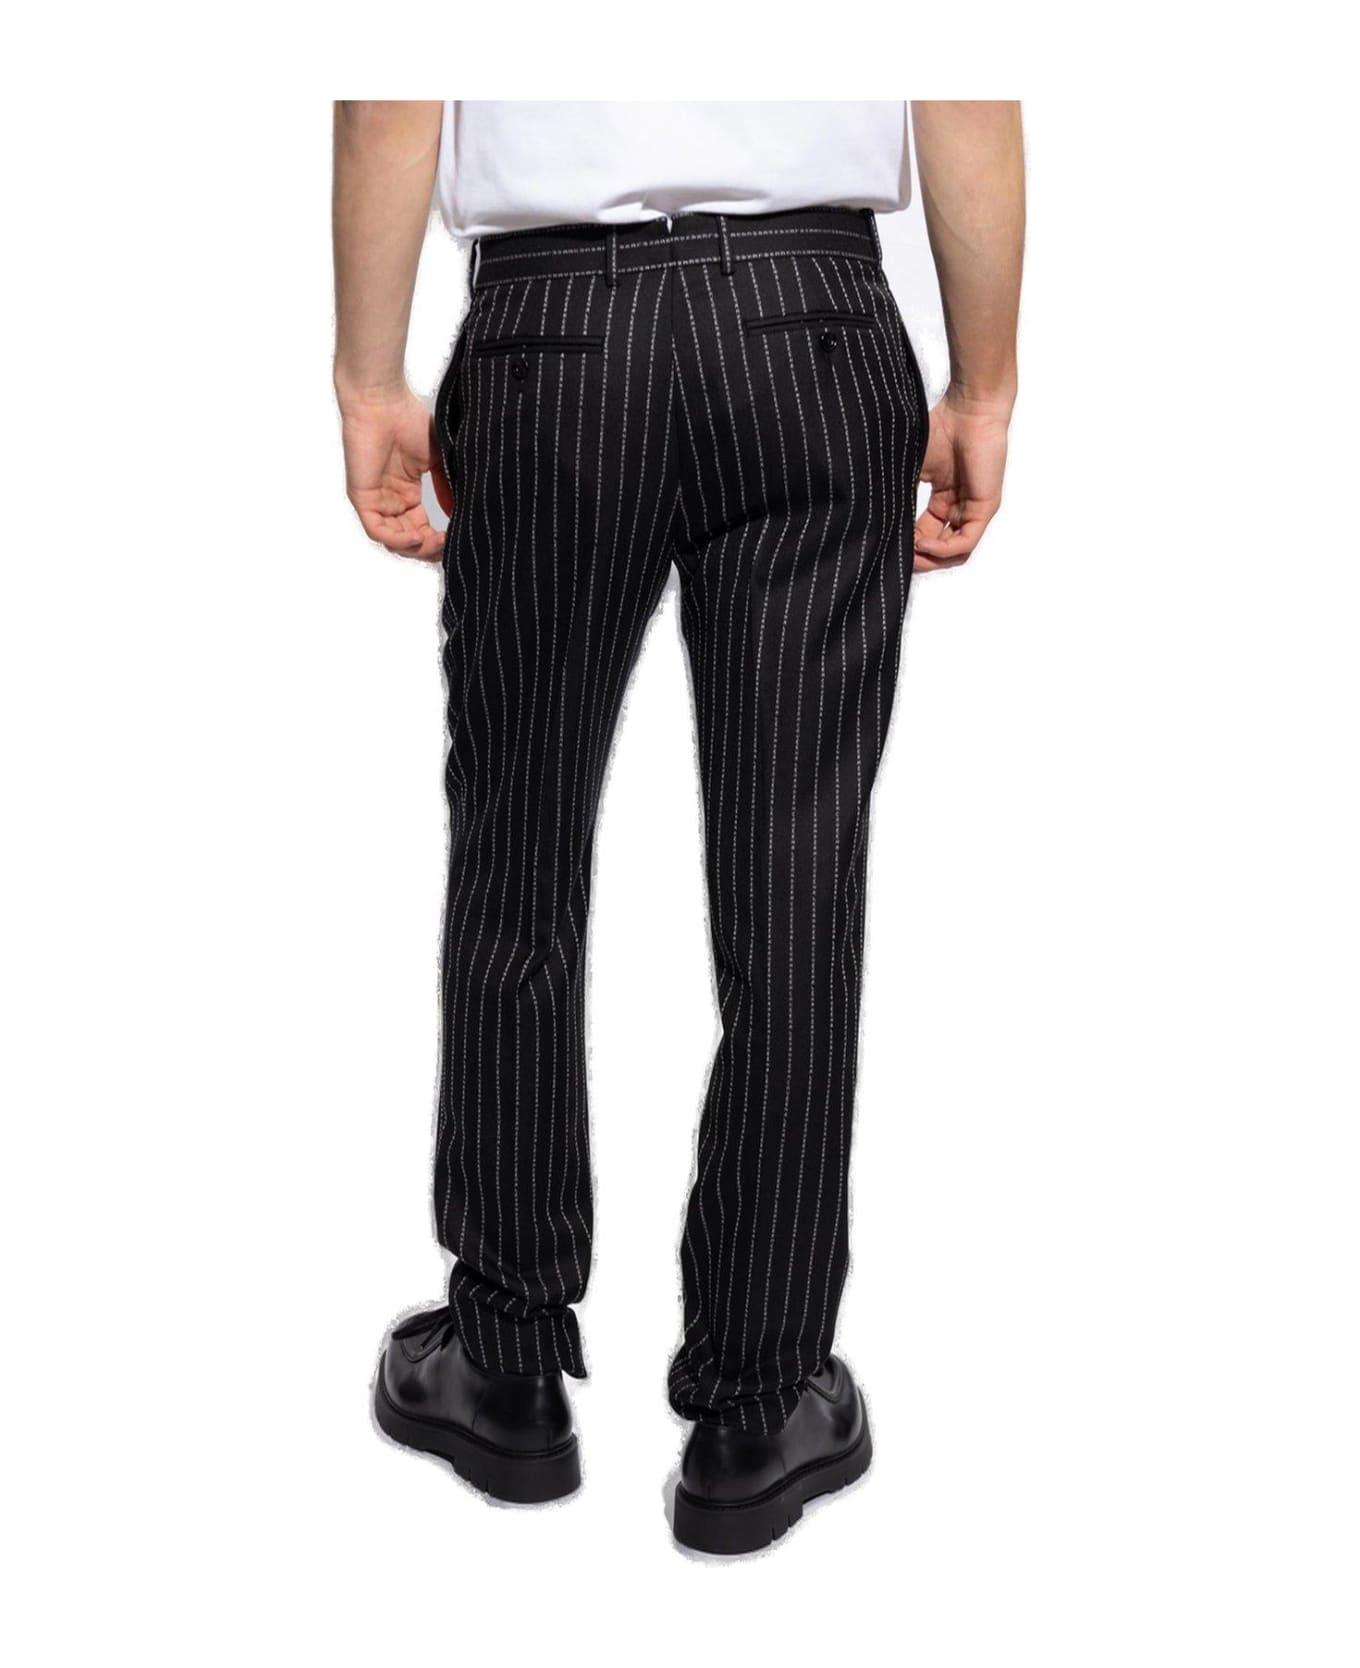 Alexander McQueen Pinstriped Front Trousers - Black ボトムス